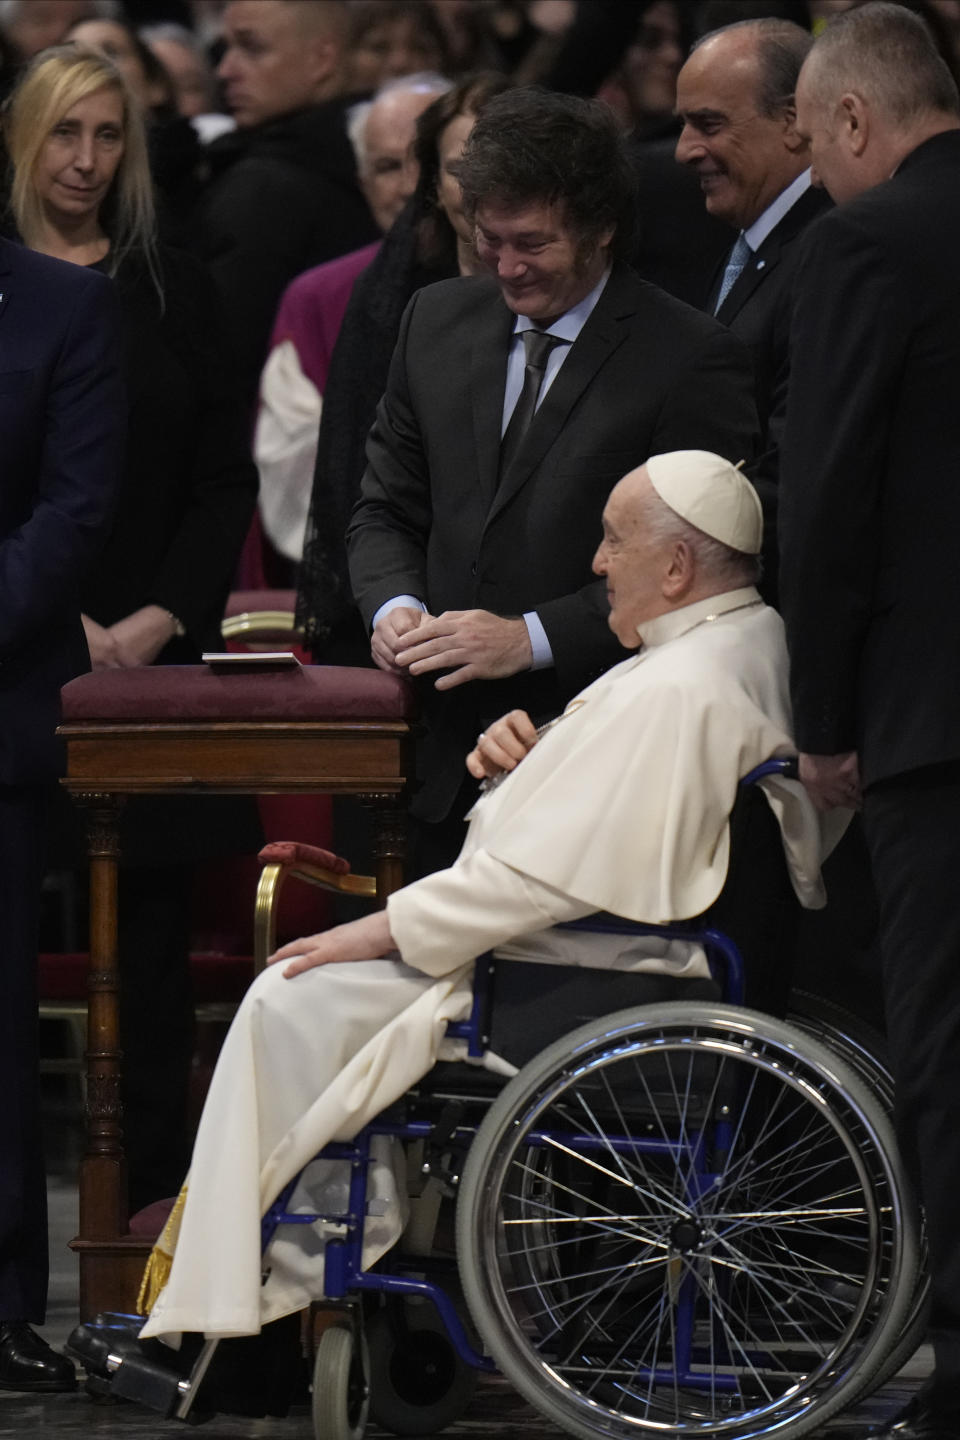 From left, Argentine Secretary-General of the Presidency Karina Milei, Argentine President Javier Milei, and Interior MInister Guillermo Francos meet with Pope Francis at the end of the canonization of new Argentine Saint, María Antonia de Paz y Figueroa also known as "Mama Antula" presided over by Pope Francis in St. Peter's Basilica at The Vatican, Sunday, Feb. 11, 2024. (AP Photo/Alessandra Tarantino)